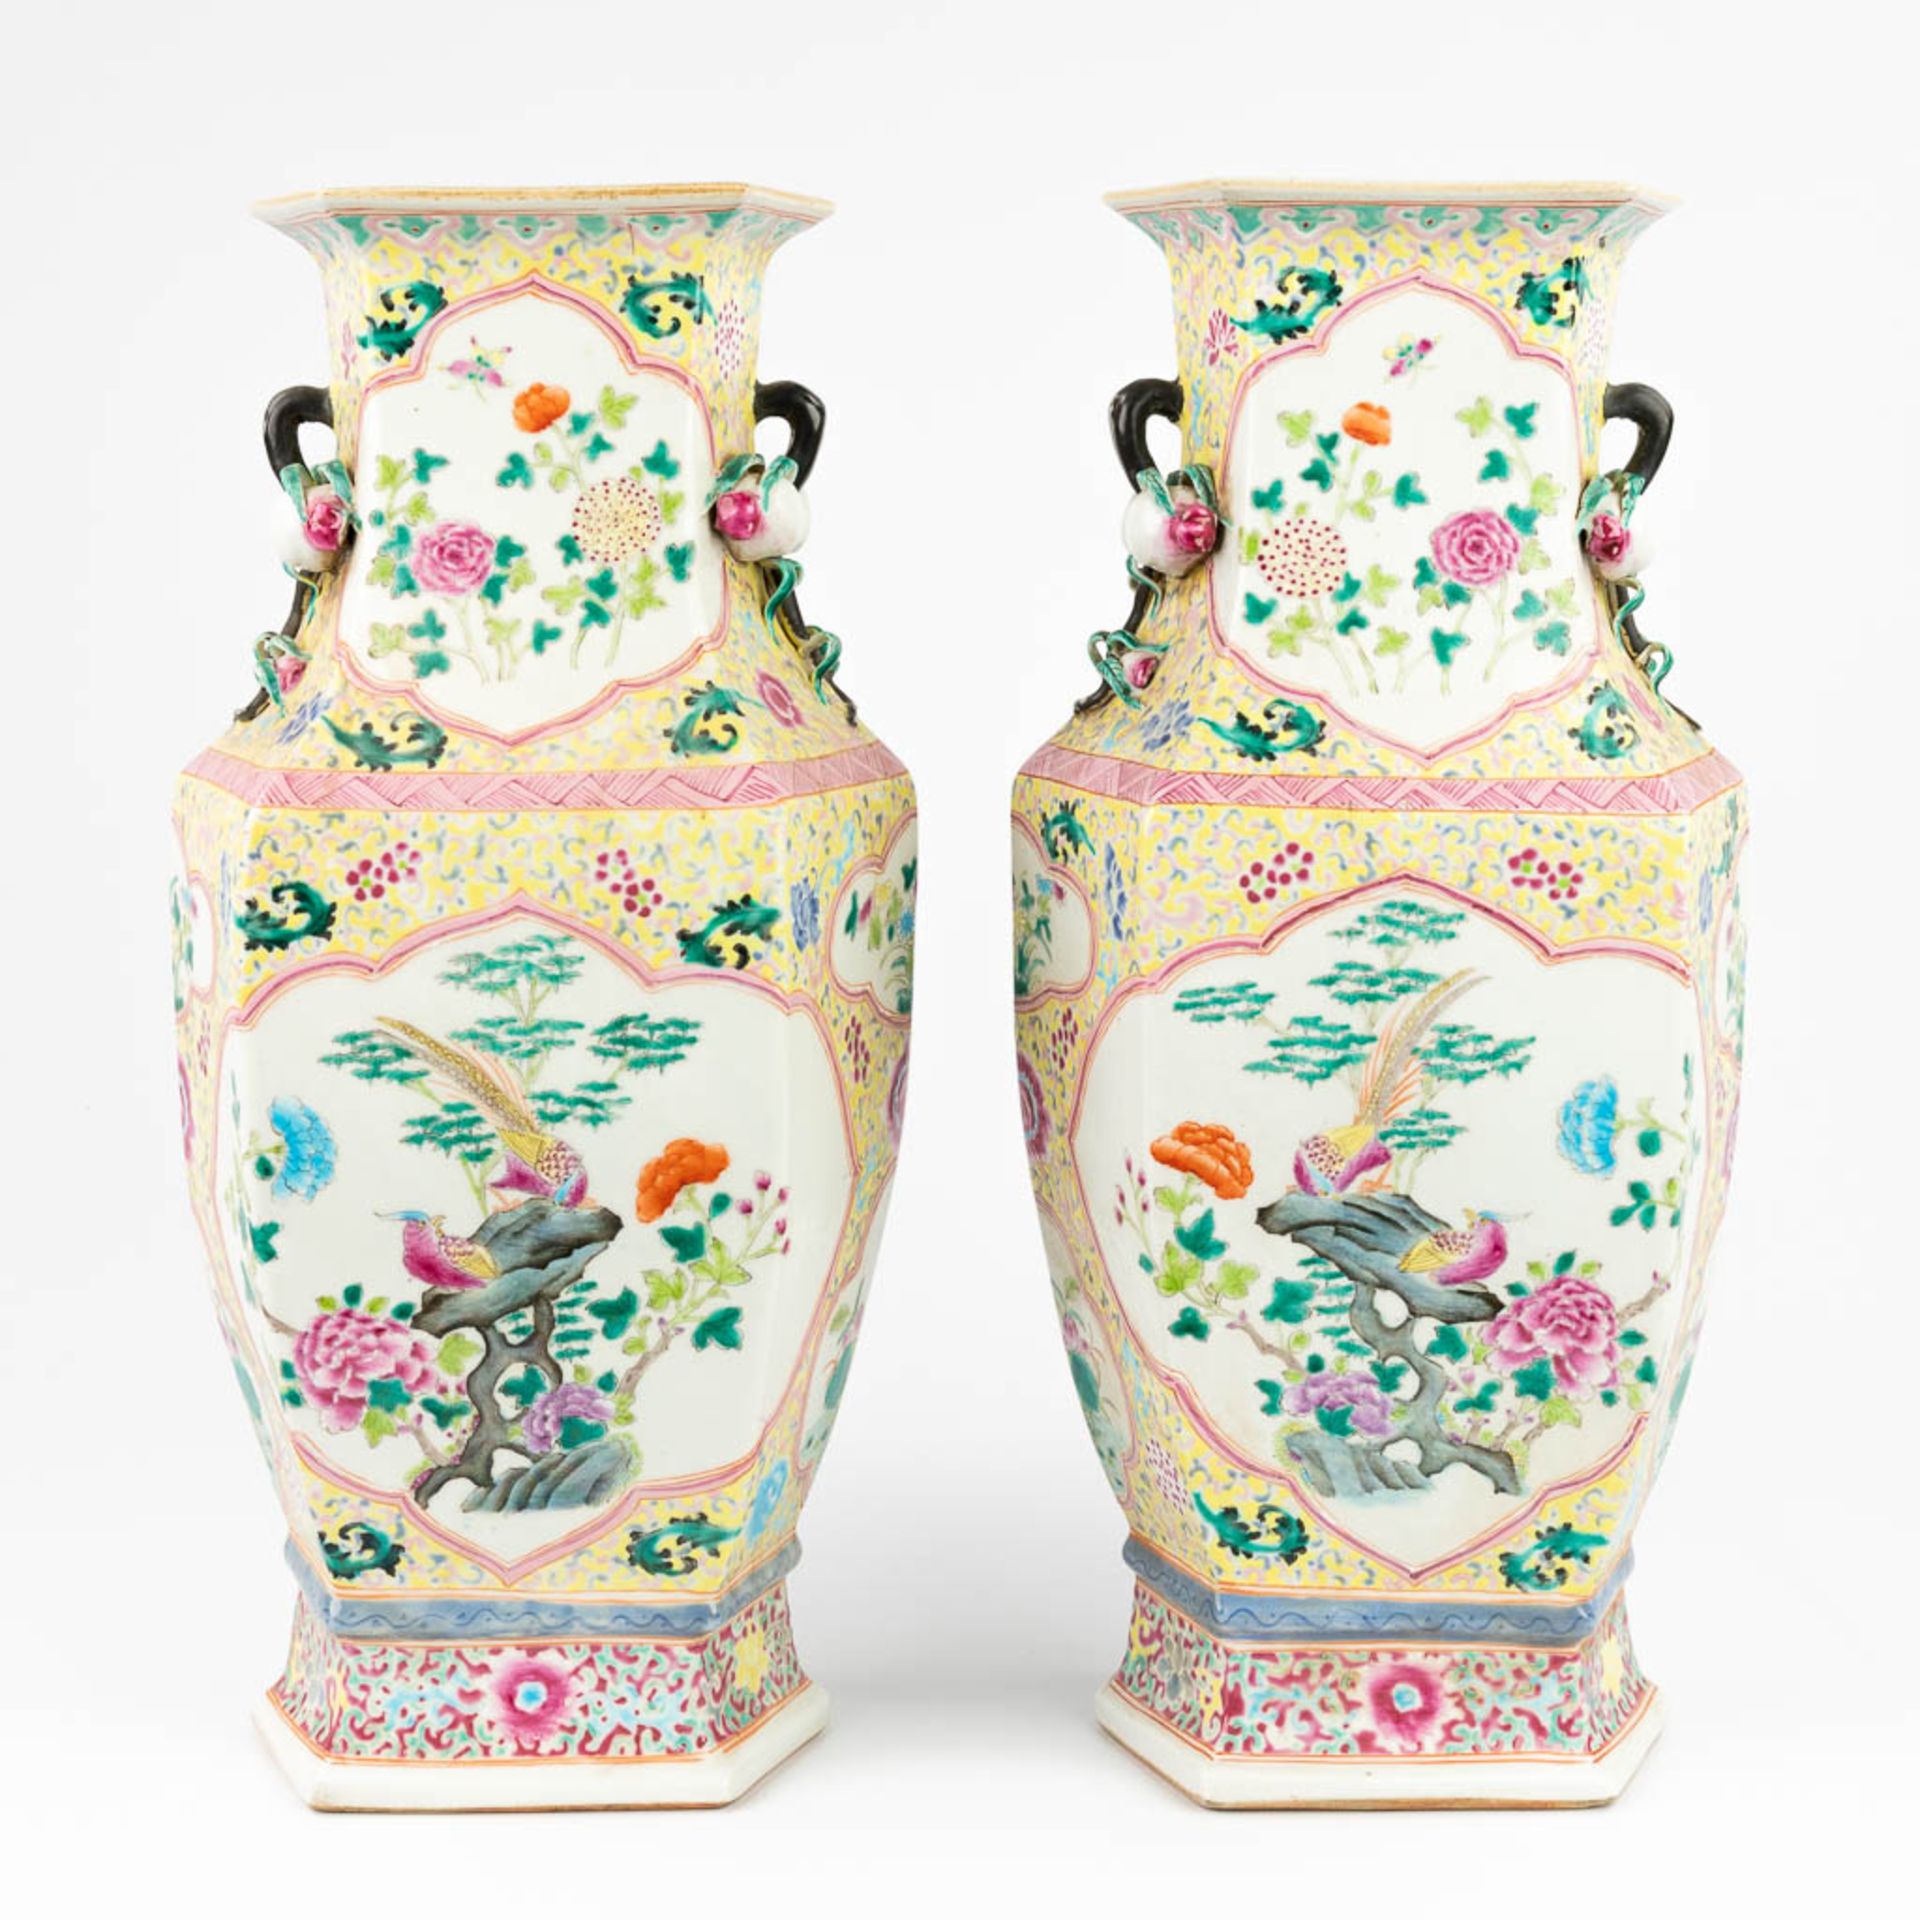 A pair of hexagonal Chinese vases made of porcelain (18 x 22 x 46 cm) - Image 15 of 17